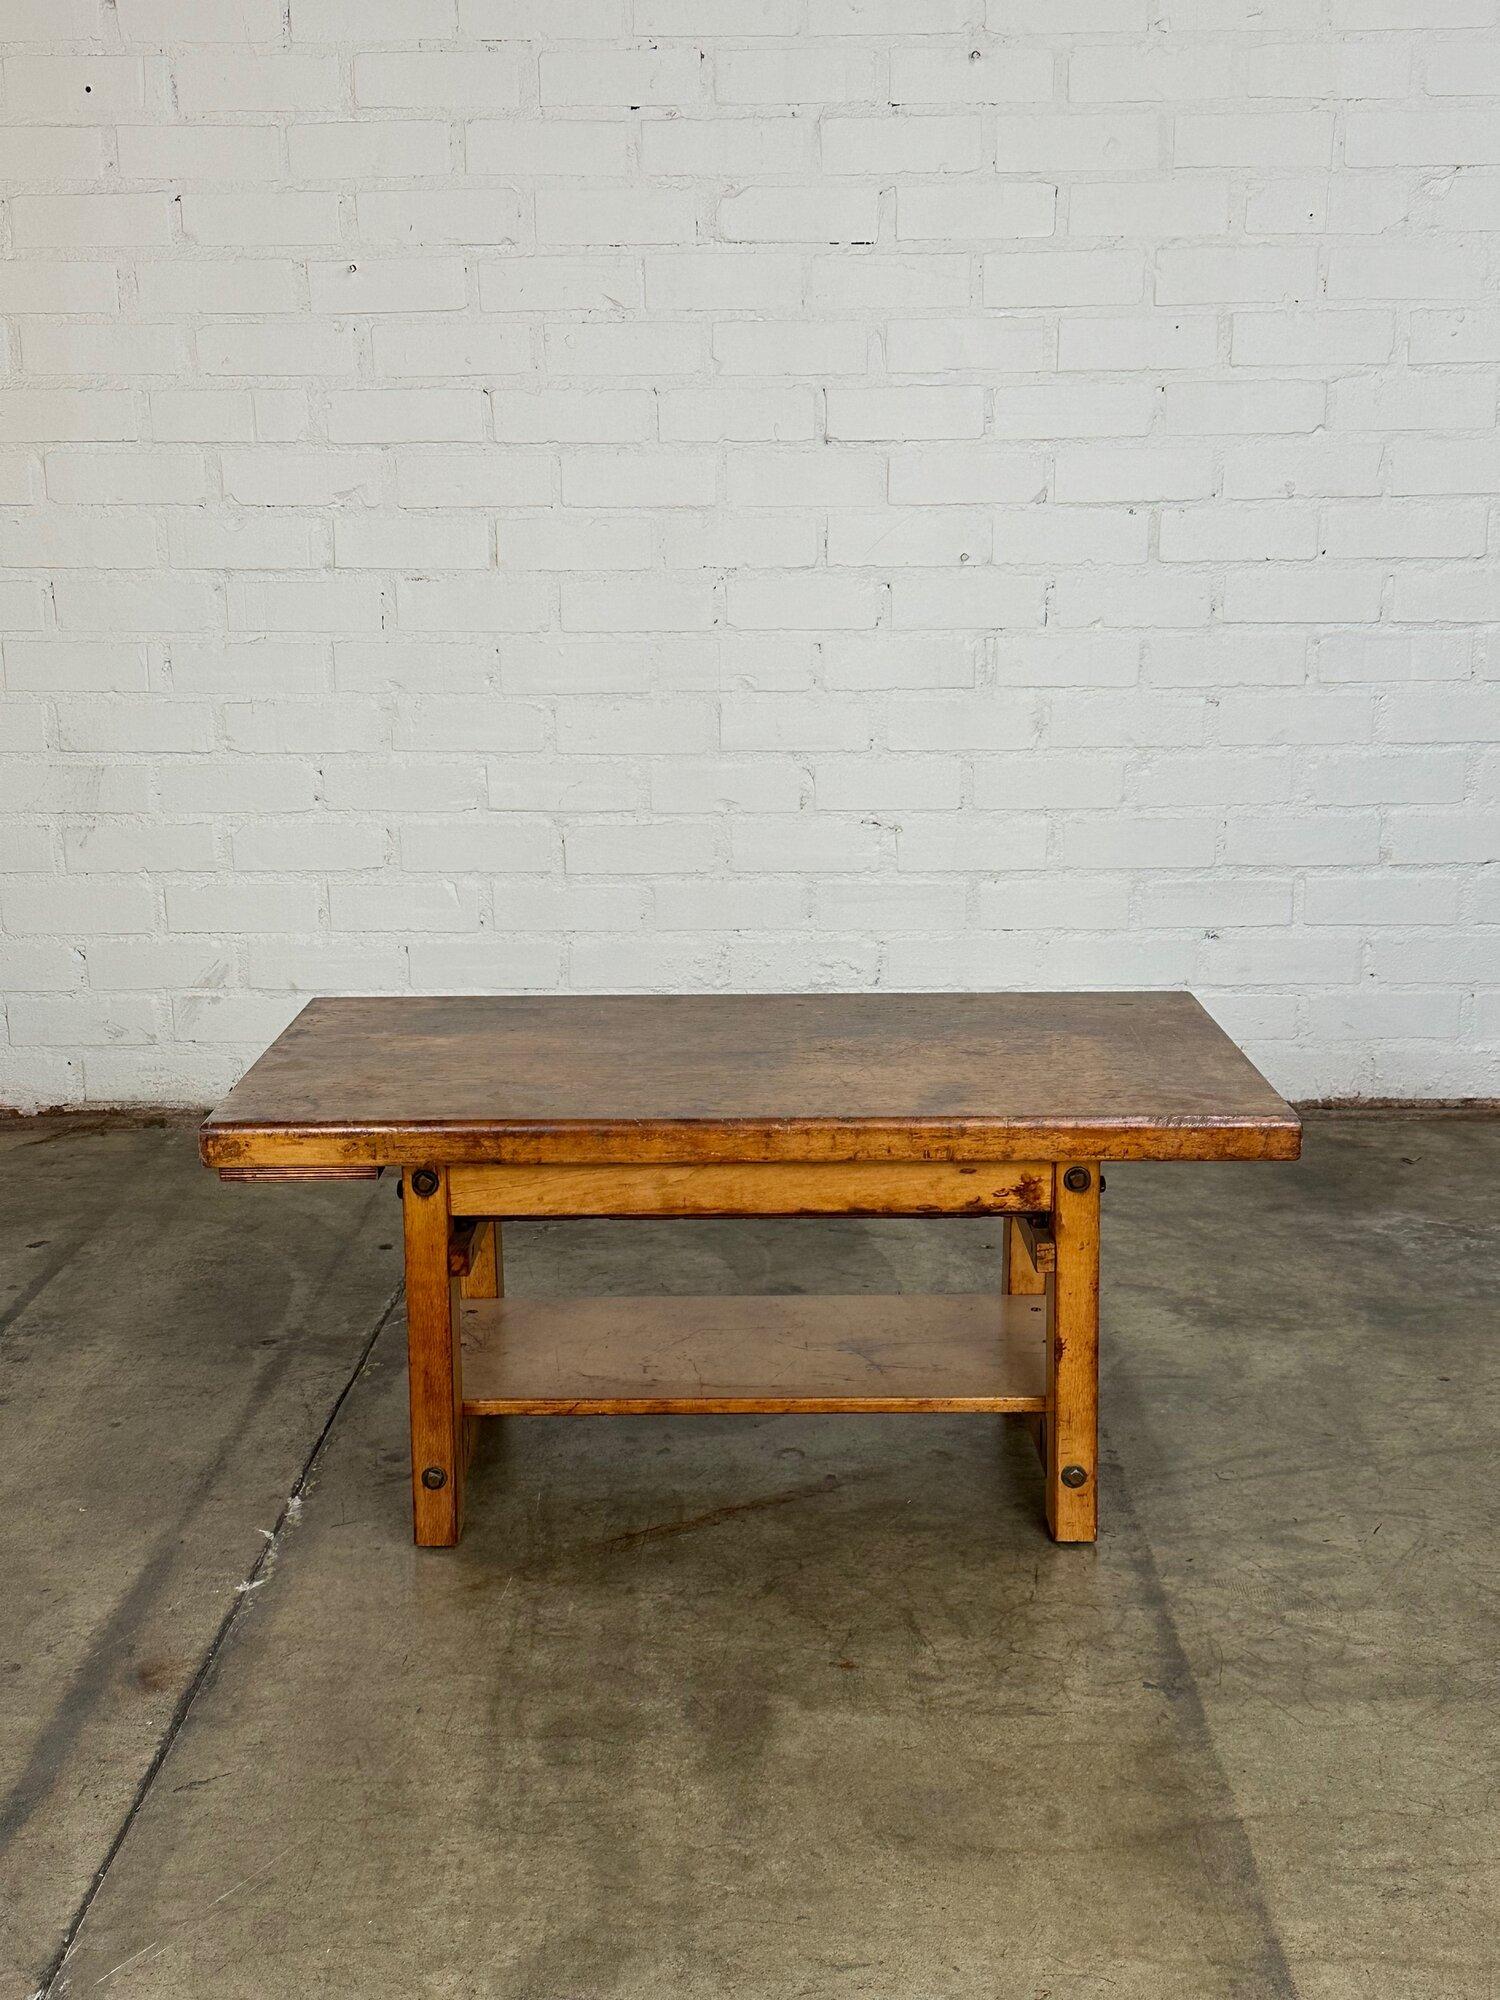 Rustic low profile work bench- reworked 5